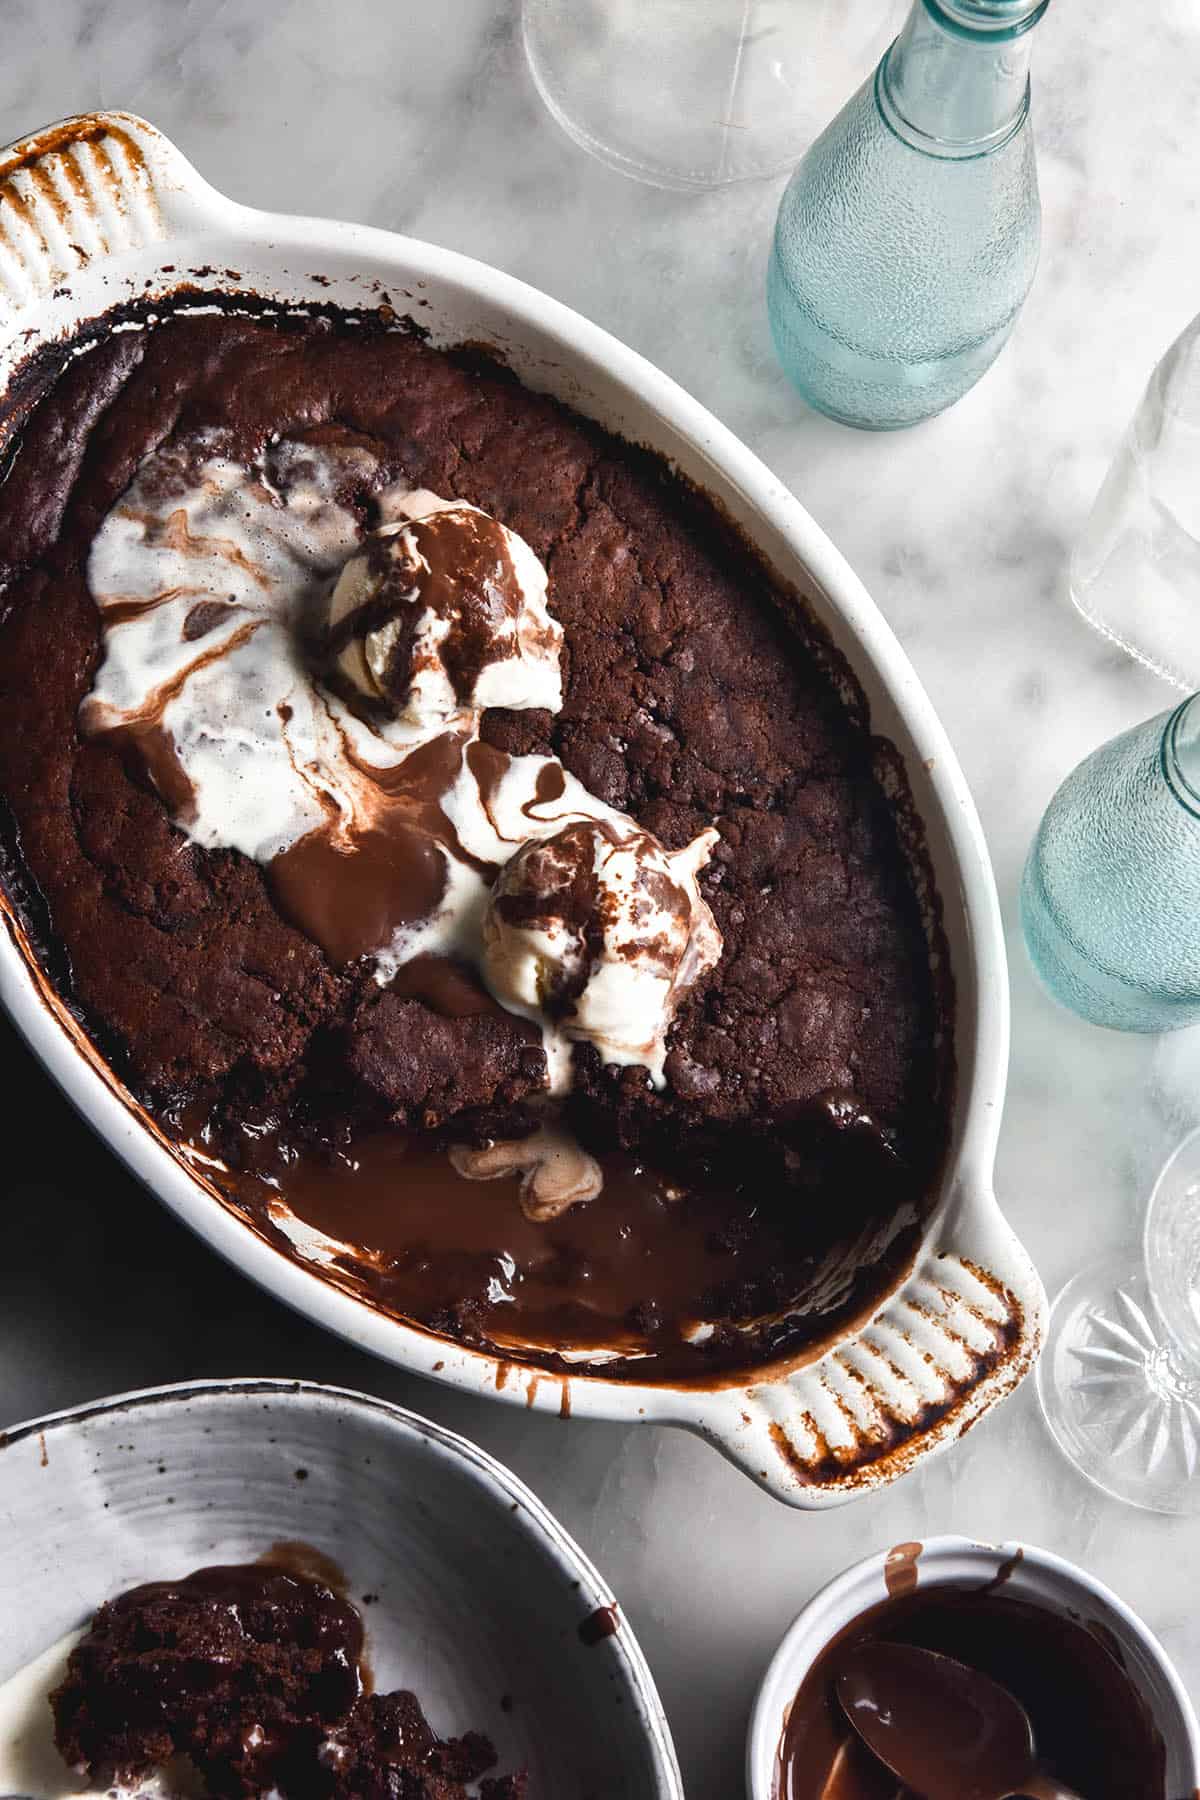 An aerial view of a grain free chocolate self saucing pudding in an oval baking dish. The dish sits on a white marble table surrounded by water glasses and more bowls of pudding. Melted vanilla ice cream and chocolate sauce meld together on the top of the pudding